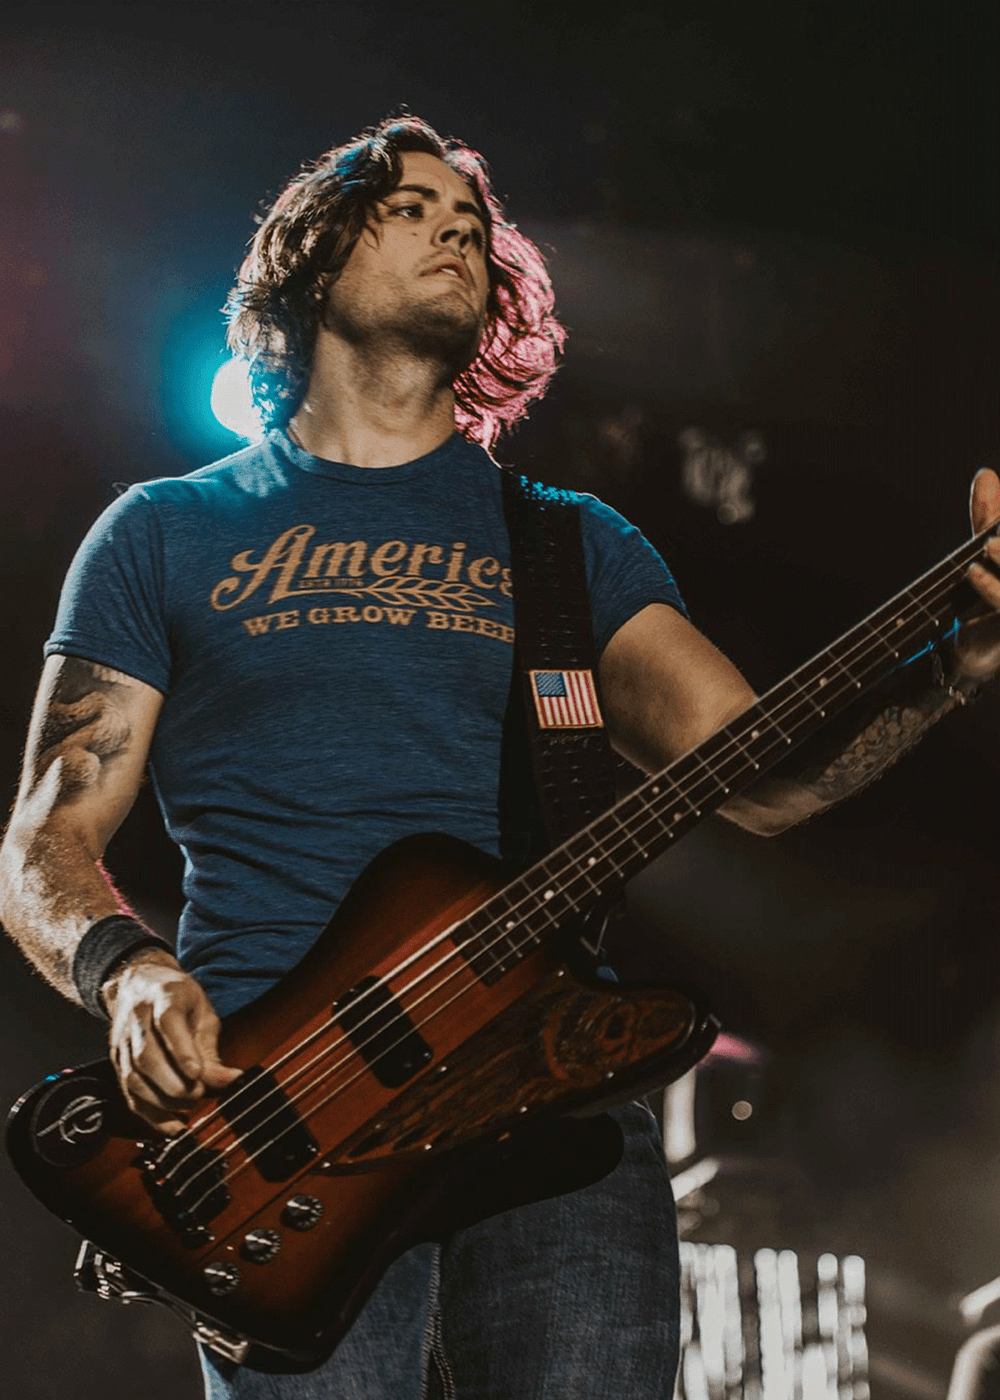 A person with shoulder-length hair stands on stage playing an electric bass guitar. They are wearing the We Grow Beer Tee - Royal from Rural Cloth, which is made from super soft combed ring-spun cotton and printed with "America: We Grow Beer." They also have on blue jeans and a wristband. Stage lights illuminate the background.